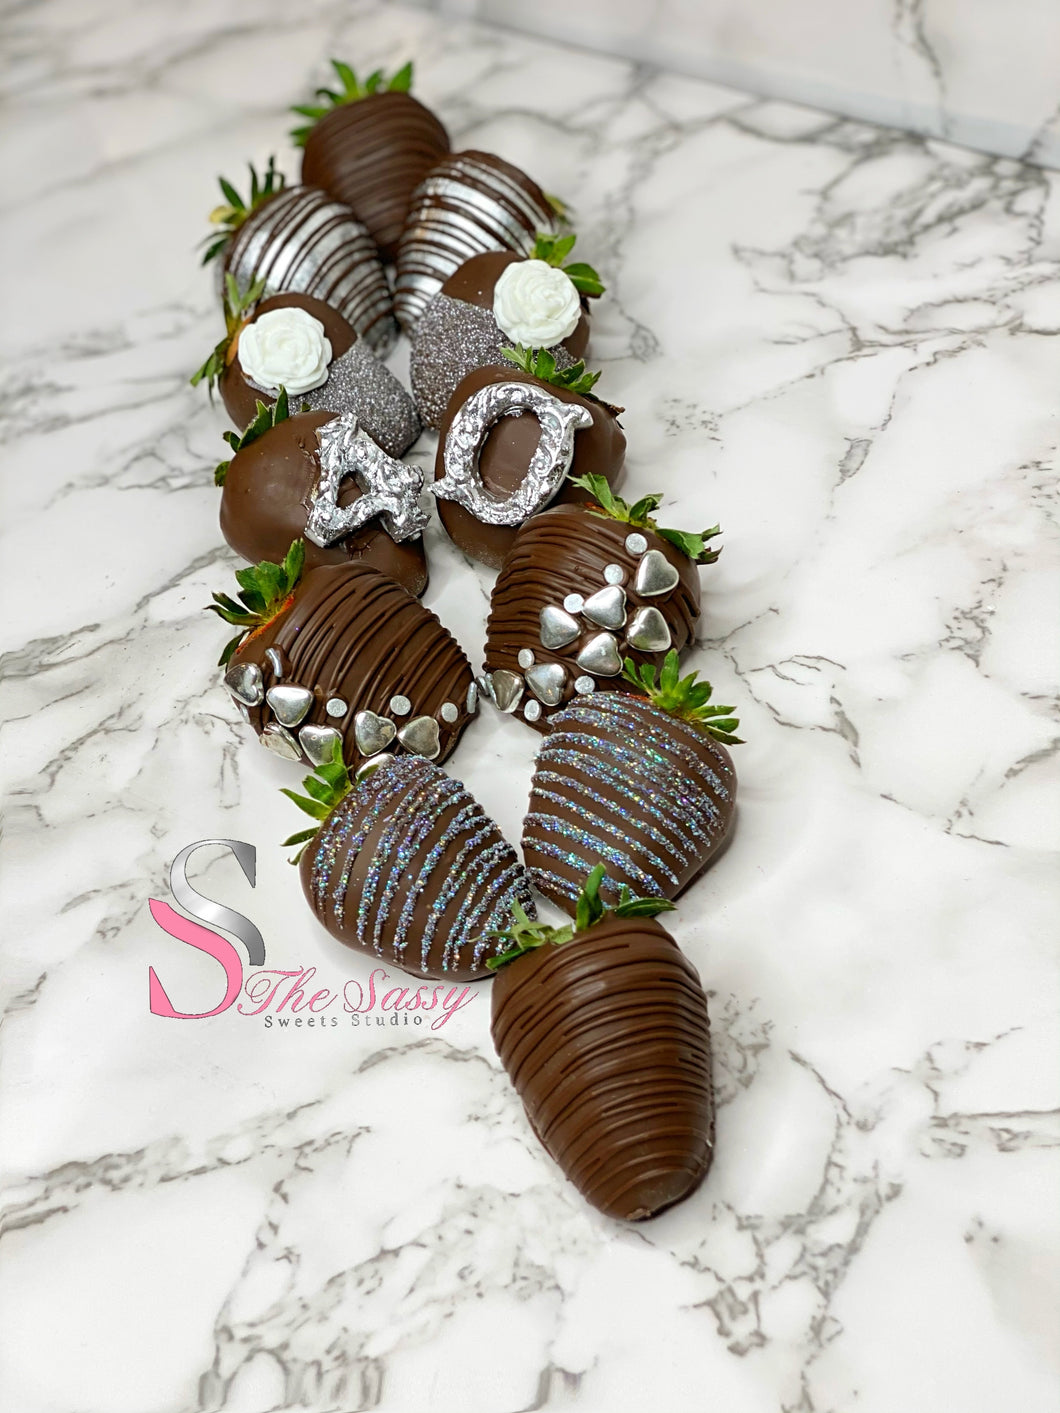 Decorated: Chocolate Covered Strawberries